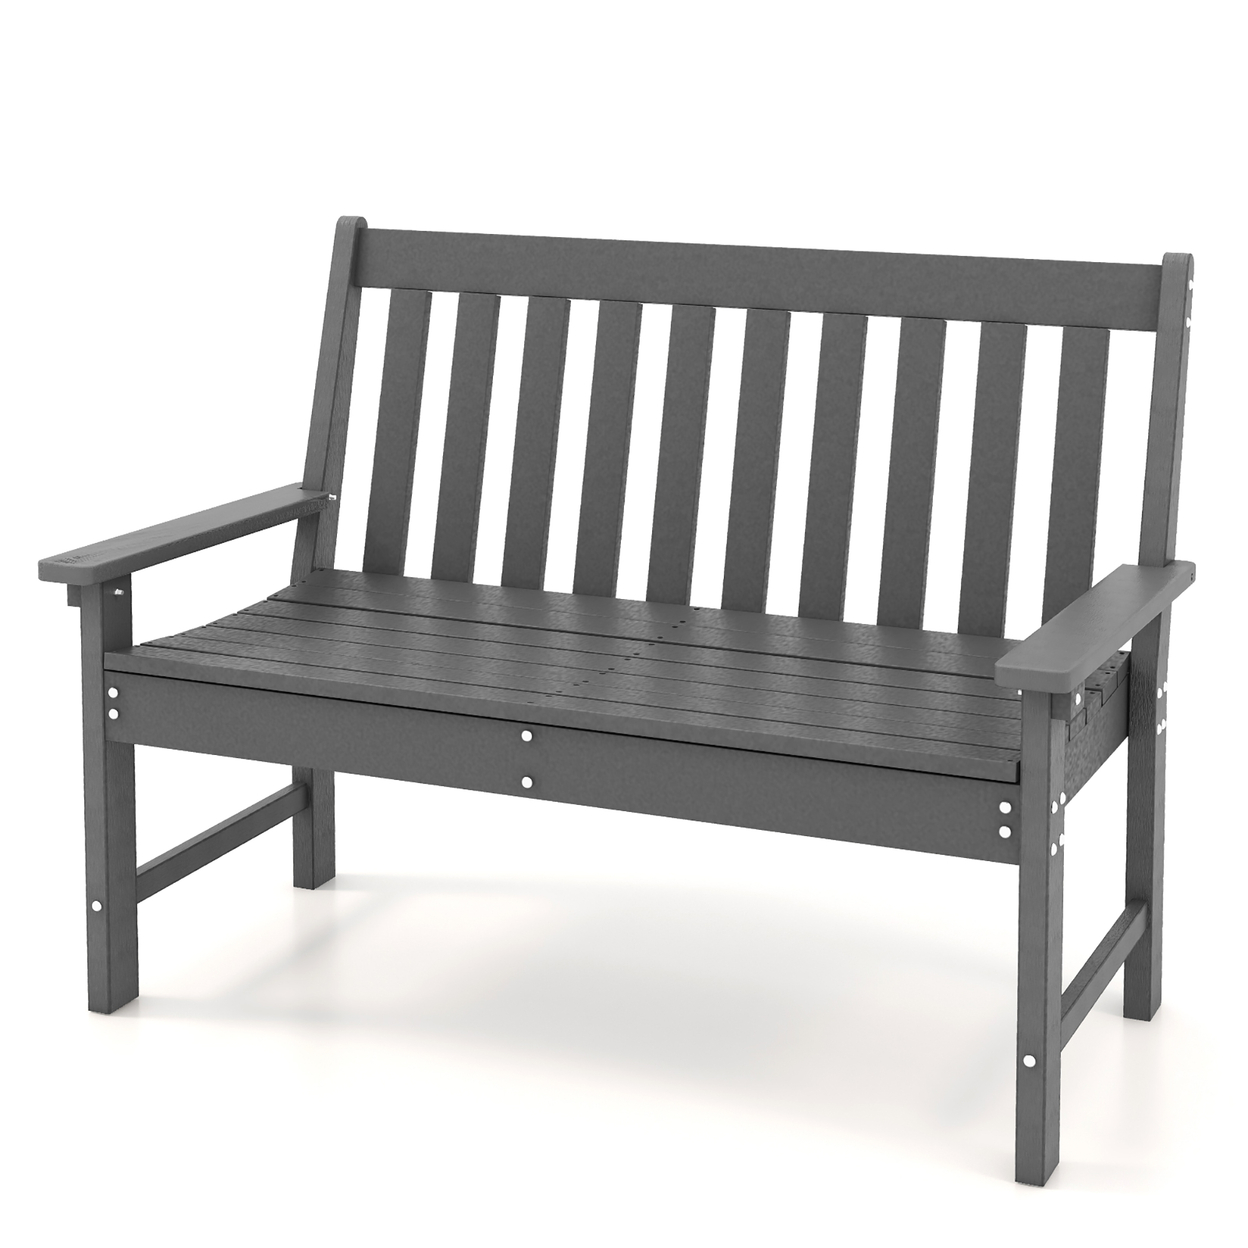 Garden Bench All-Weather HDPE 2-Person Outdoor Bench For Front Porch Backyard